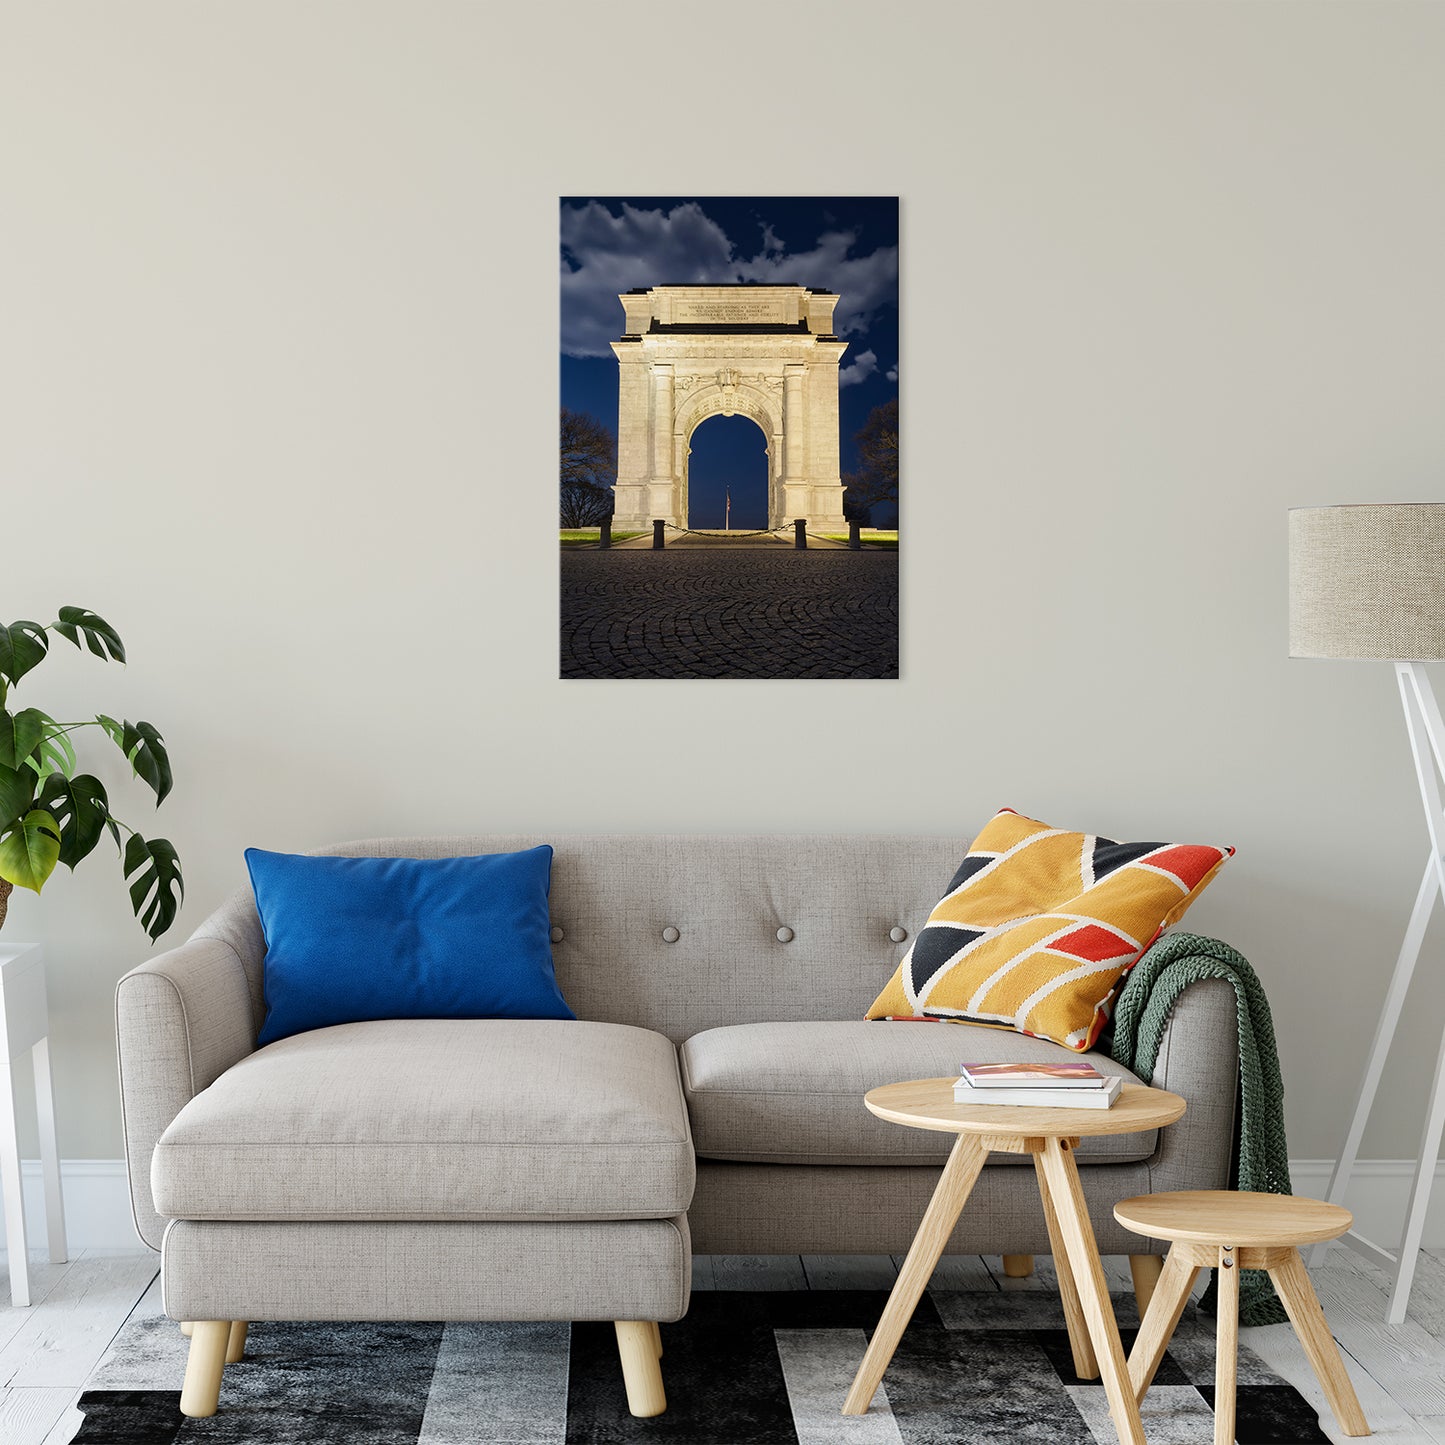 Valley Forge Memorial Arch Night Photo Fine Art Canvas Wall Art Prints 24" x 36" - PIPAFINEART